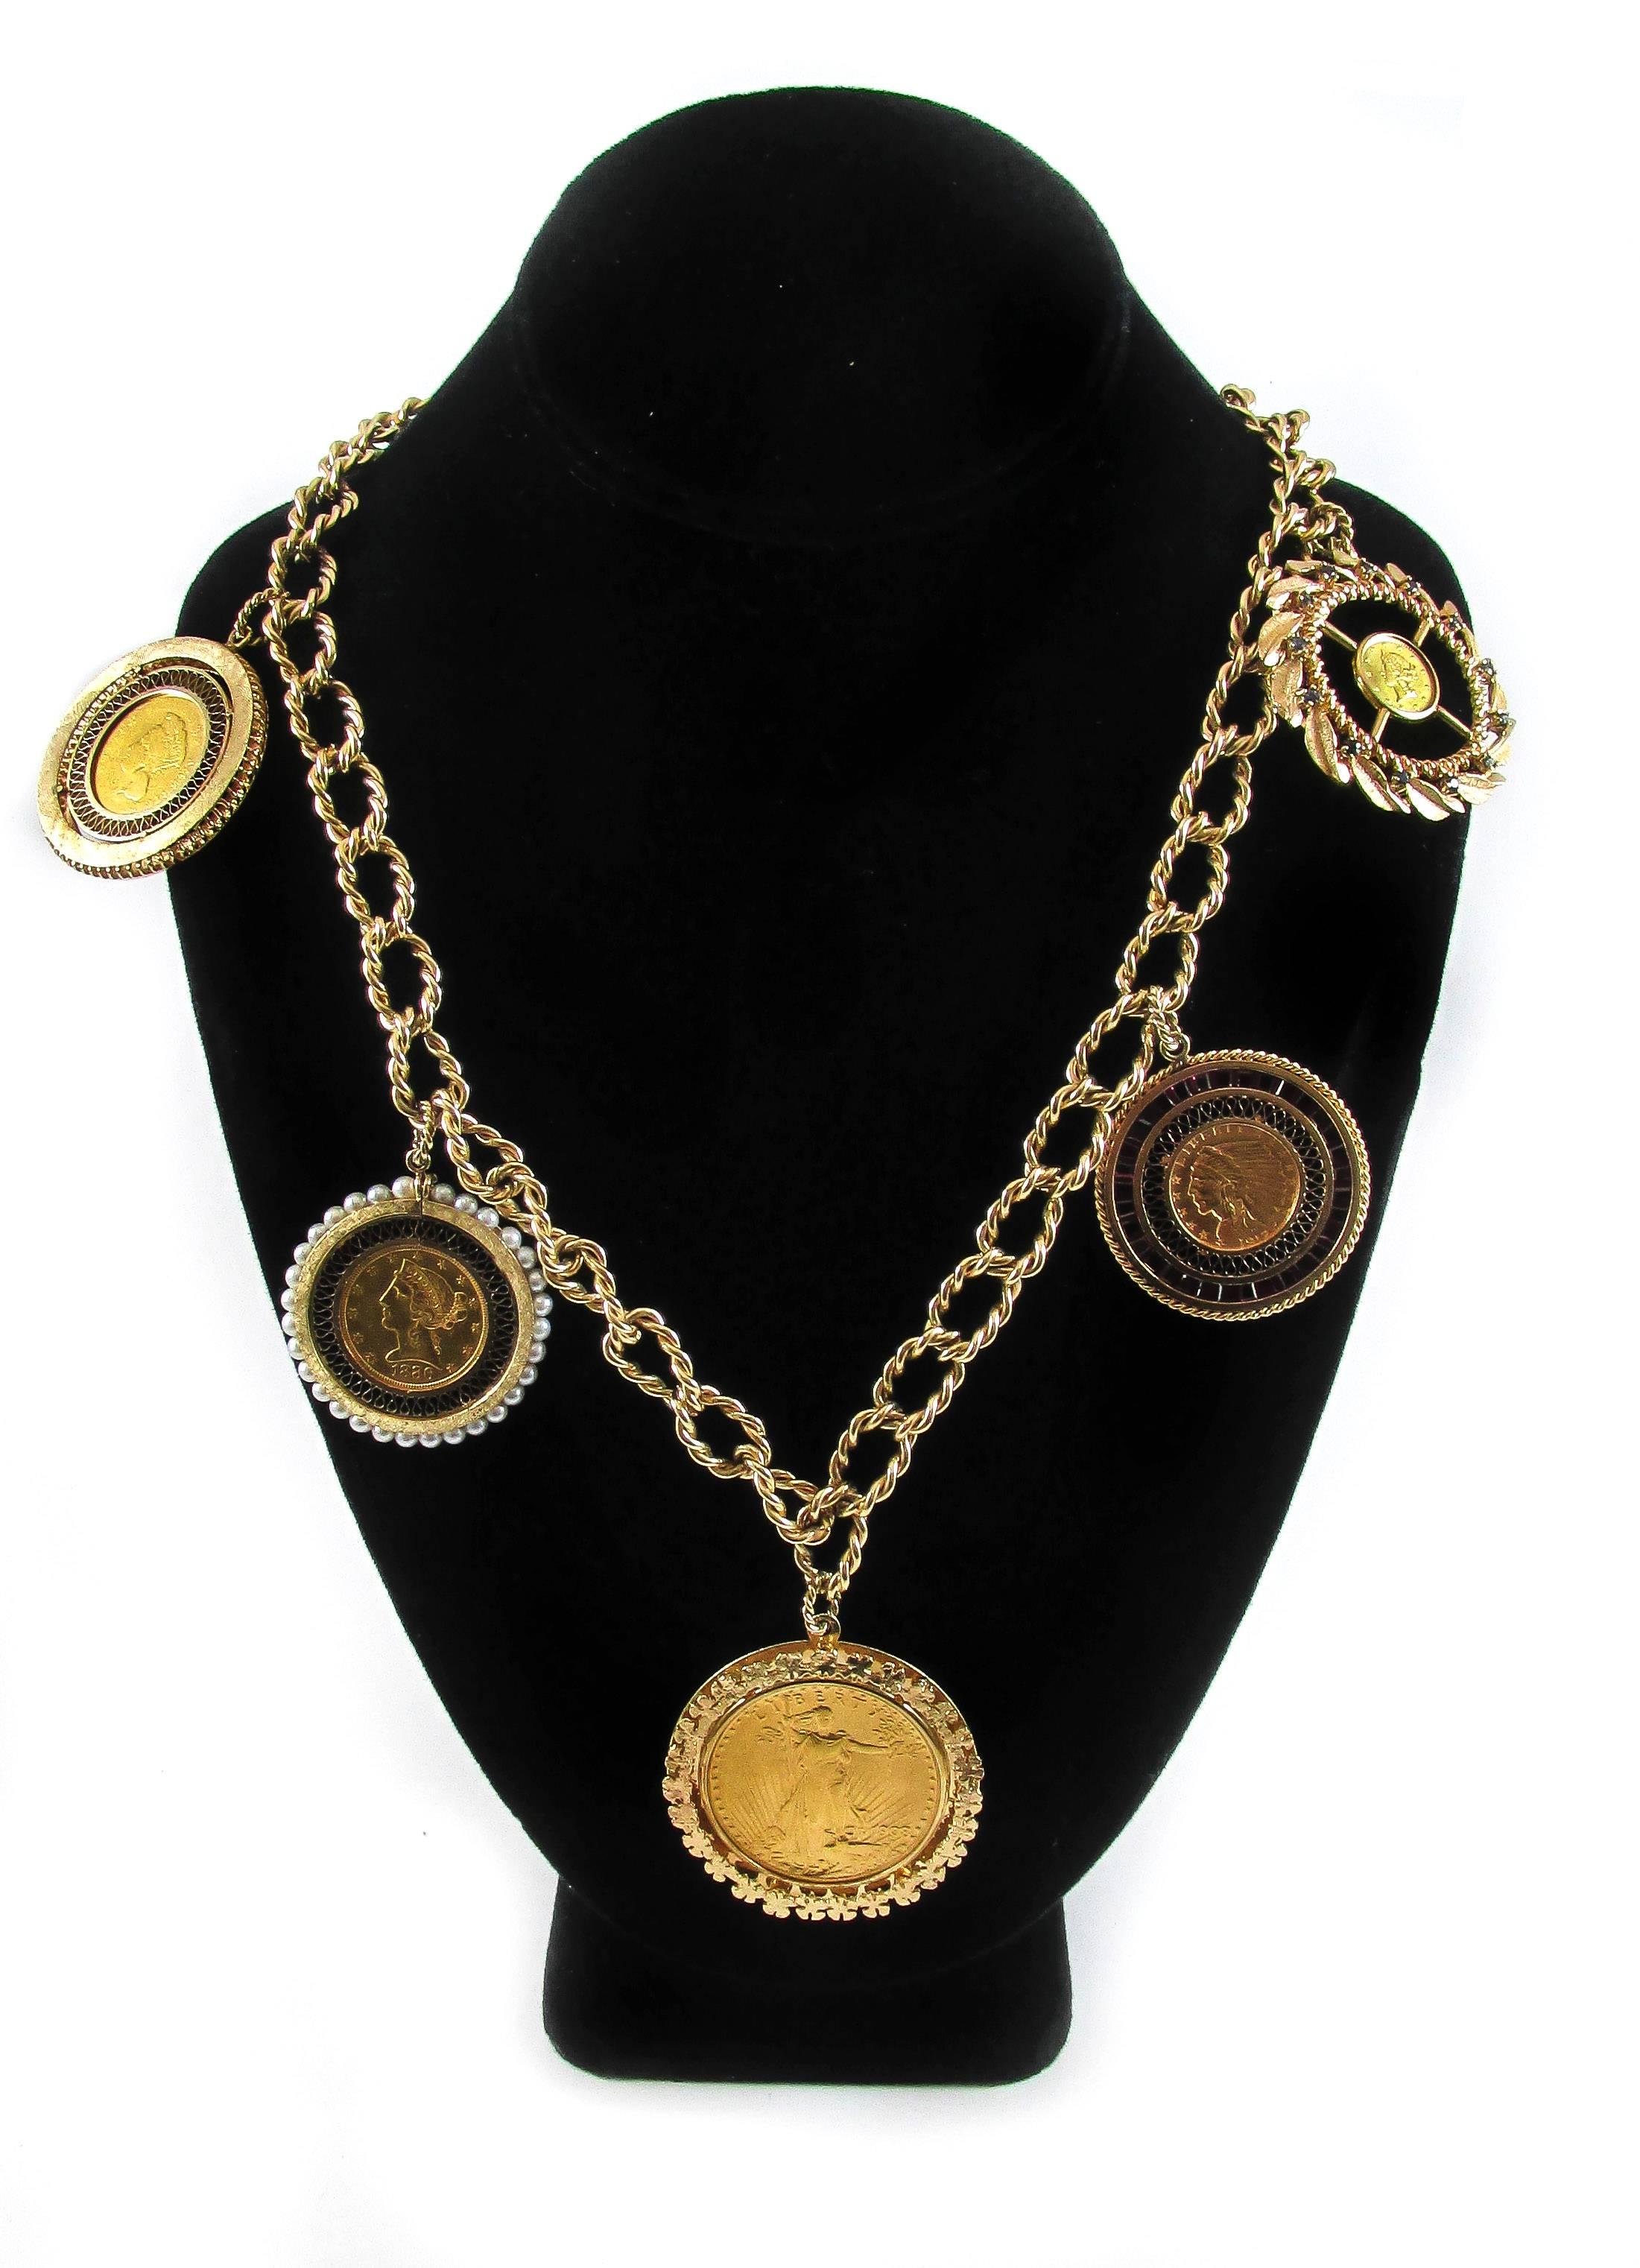 Gorgeous 14 karat yellow gold chain necklace with five (5)  22 ct. gold coins:
- $20 1908 Liberty gold coin surrounded in 4 leaf clover motif with a diameter of 1.75 inches.   
- $2.5 1912 Indian head gold coin surrounded by 33 synthetic rubies